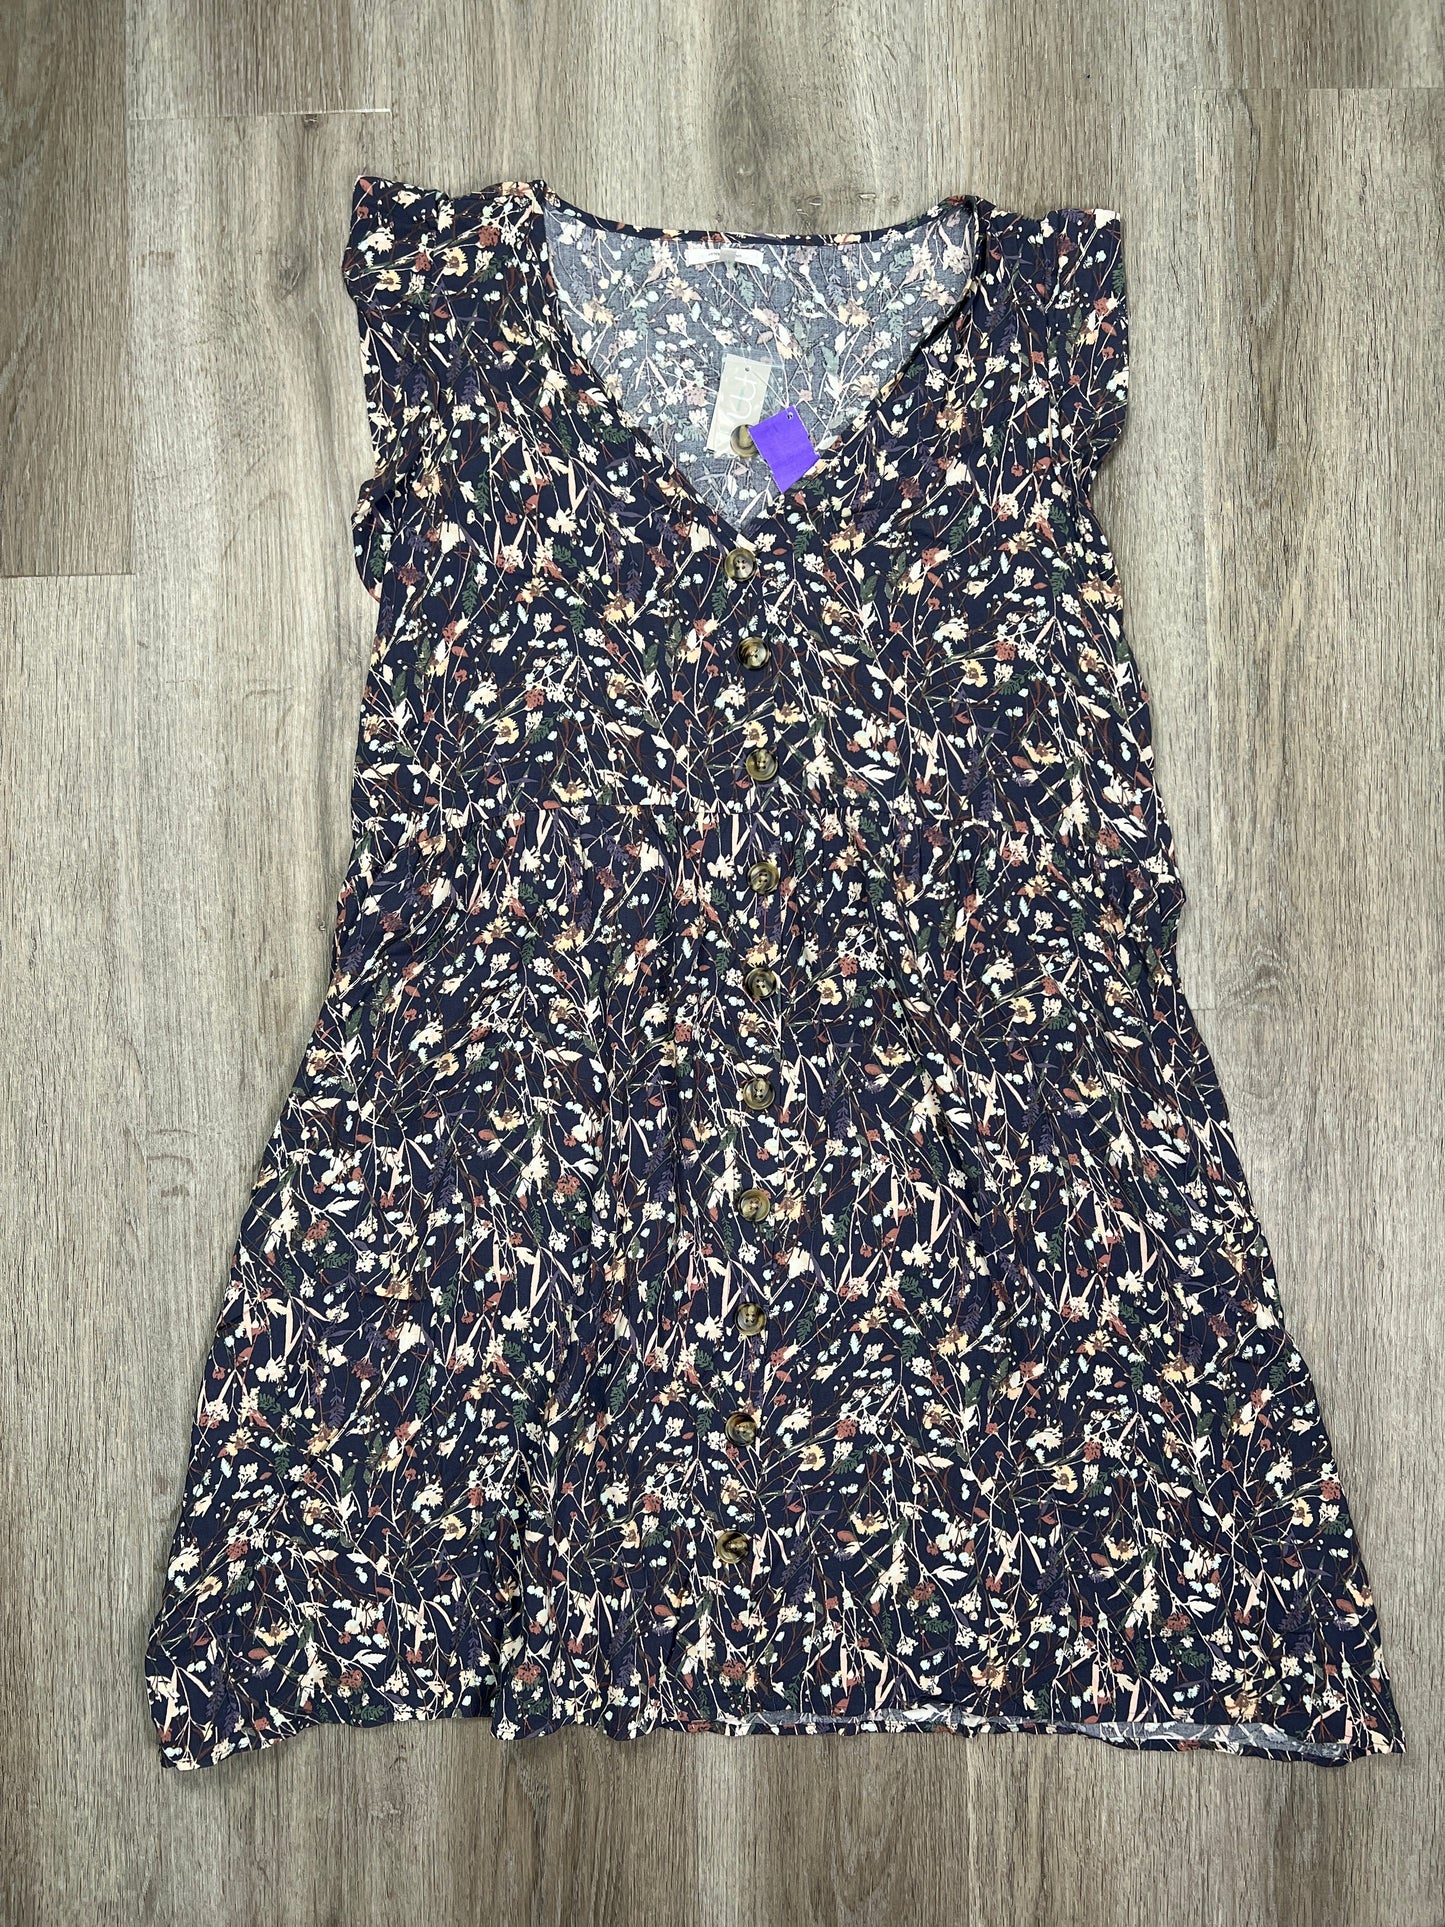 Floral Print Dress Casual Midi Maurices, Size 2x